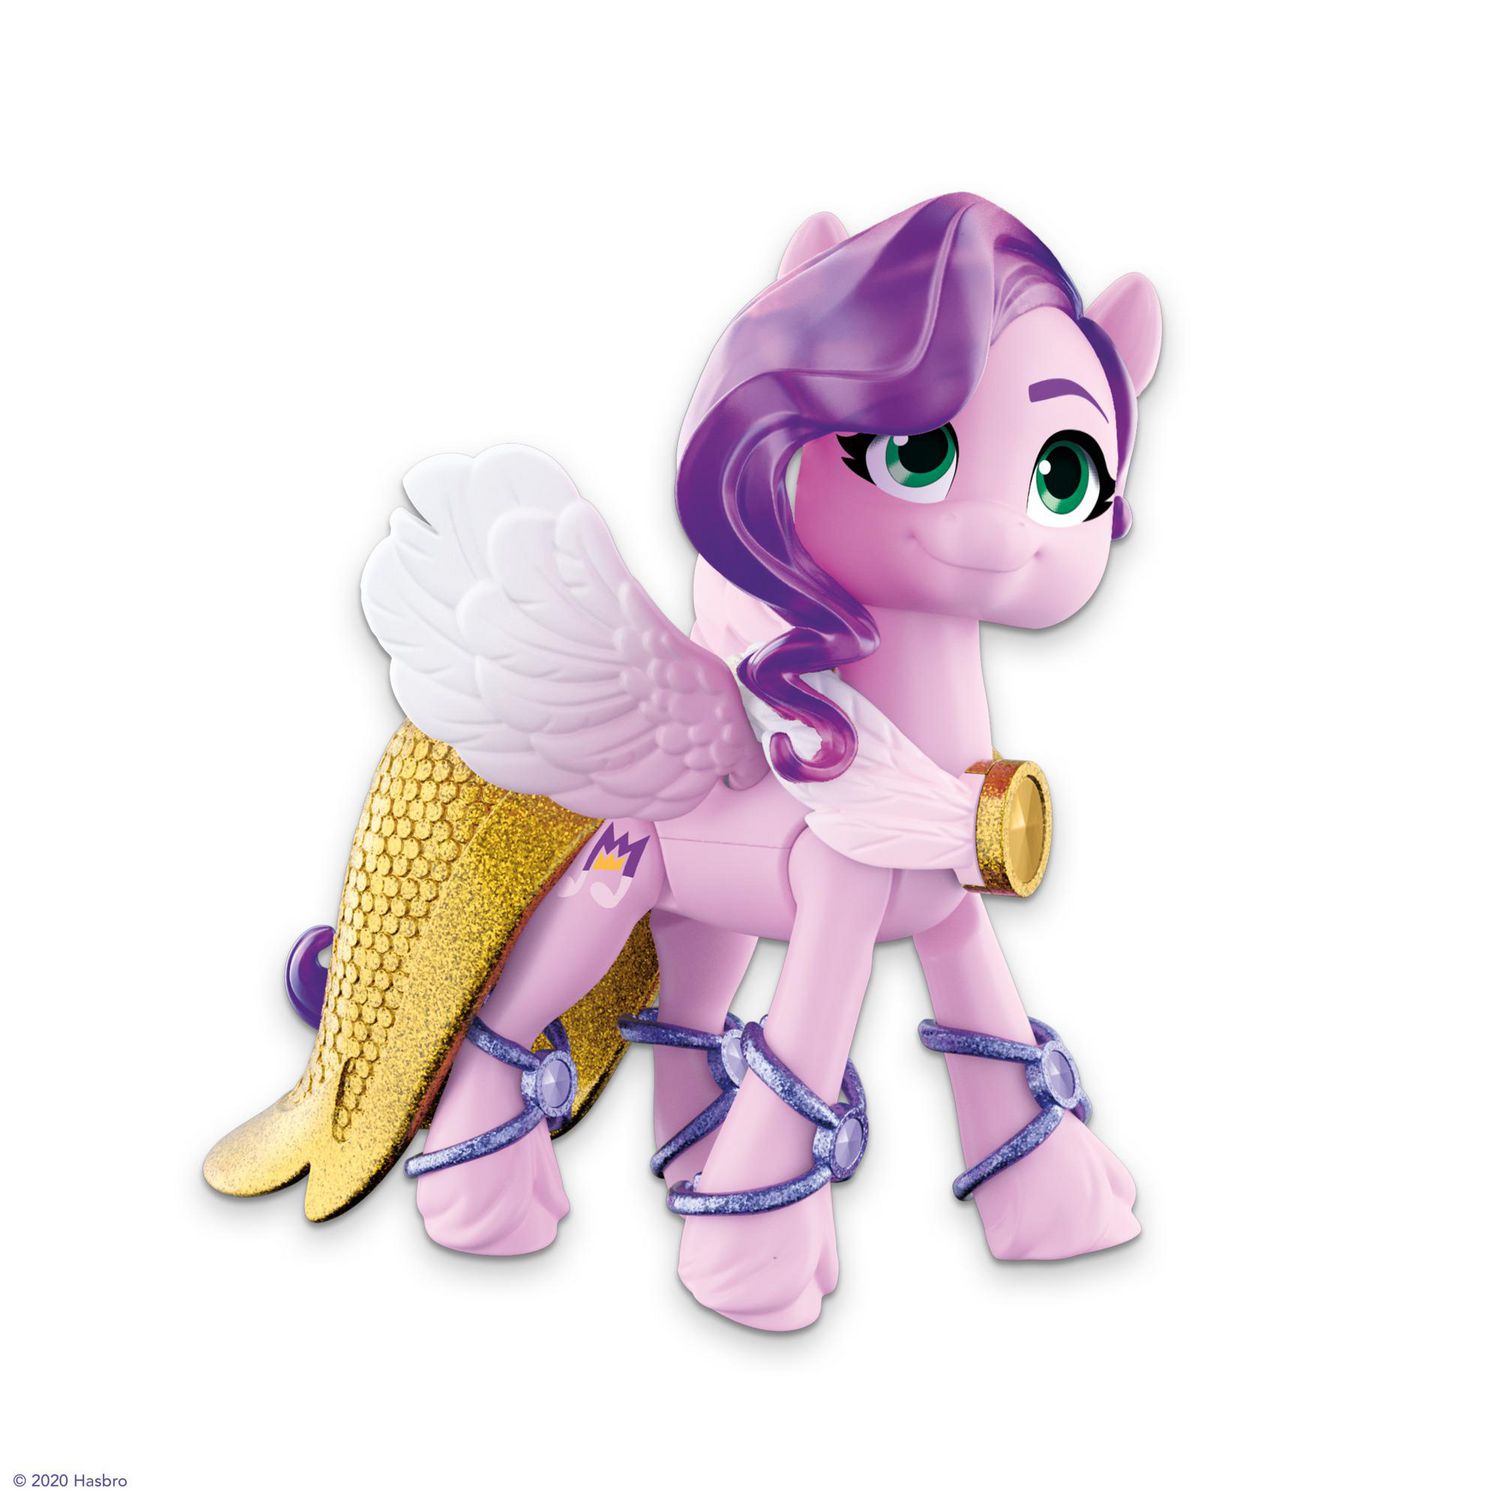 A　Princess　3-Inch　Friendship　Toy,　Generation　Petals　Pony:　Little　Pony　Bracelet　Surprise　Adventure　Movie　New　Pink　Accessories,　My　Crystal